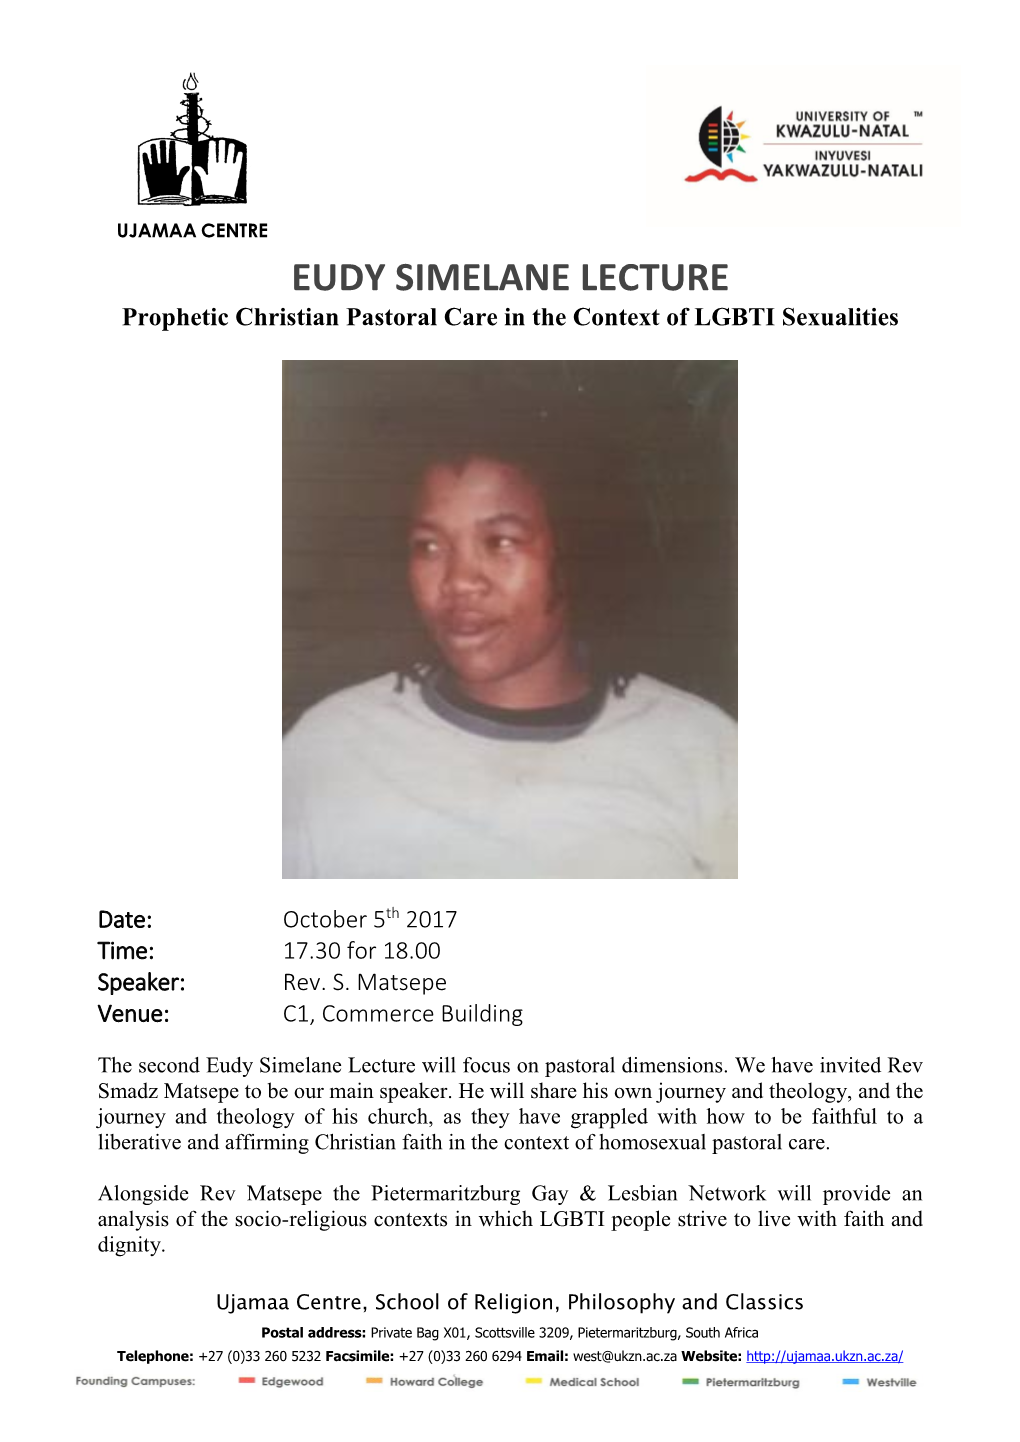 EUDY SIMELANE LECTURE Prophetic Christian Pastoral Care in the Context of LGBTI Sexualities